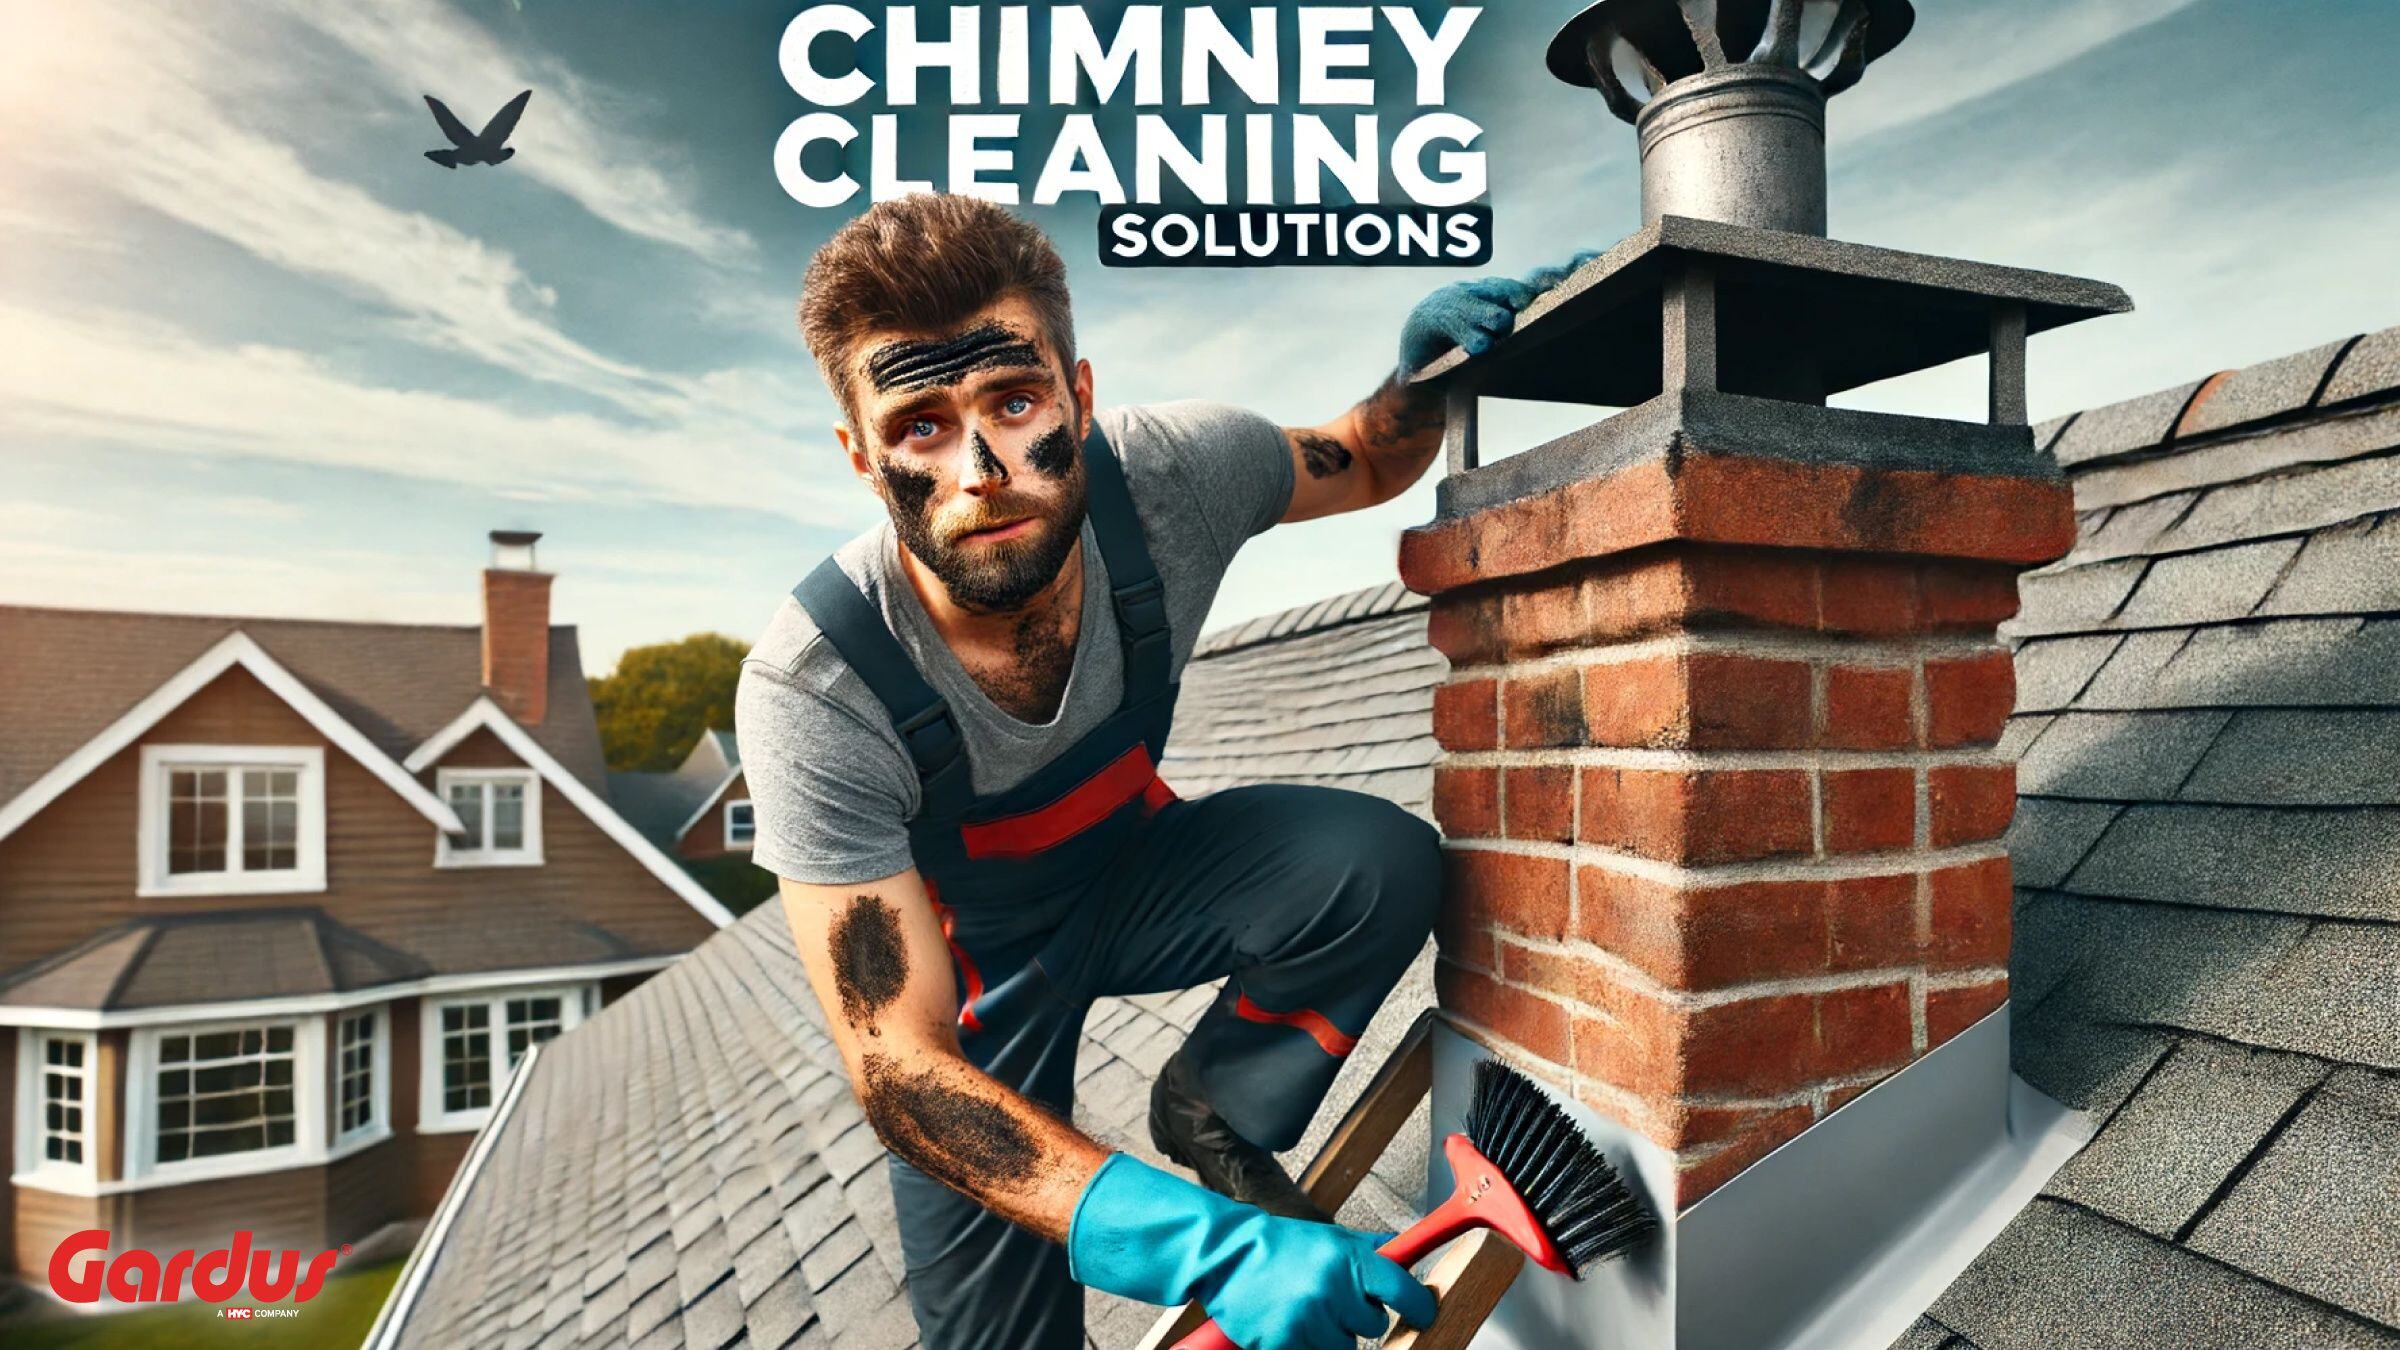 ChimneyCleaning.CatListing_6.24